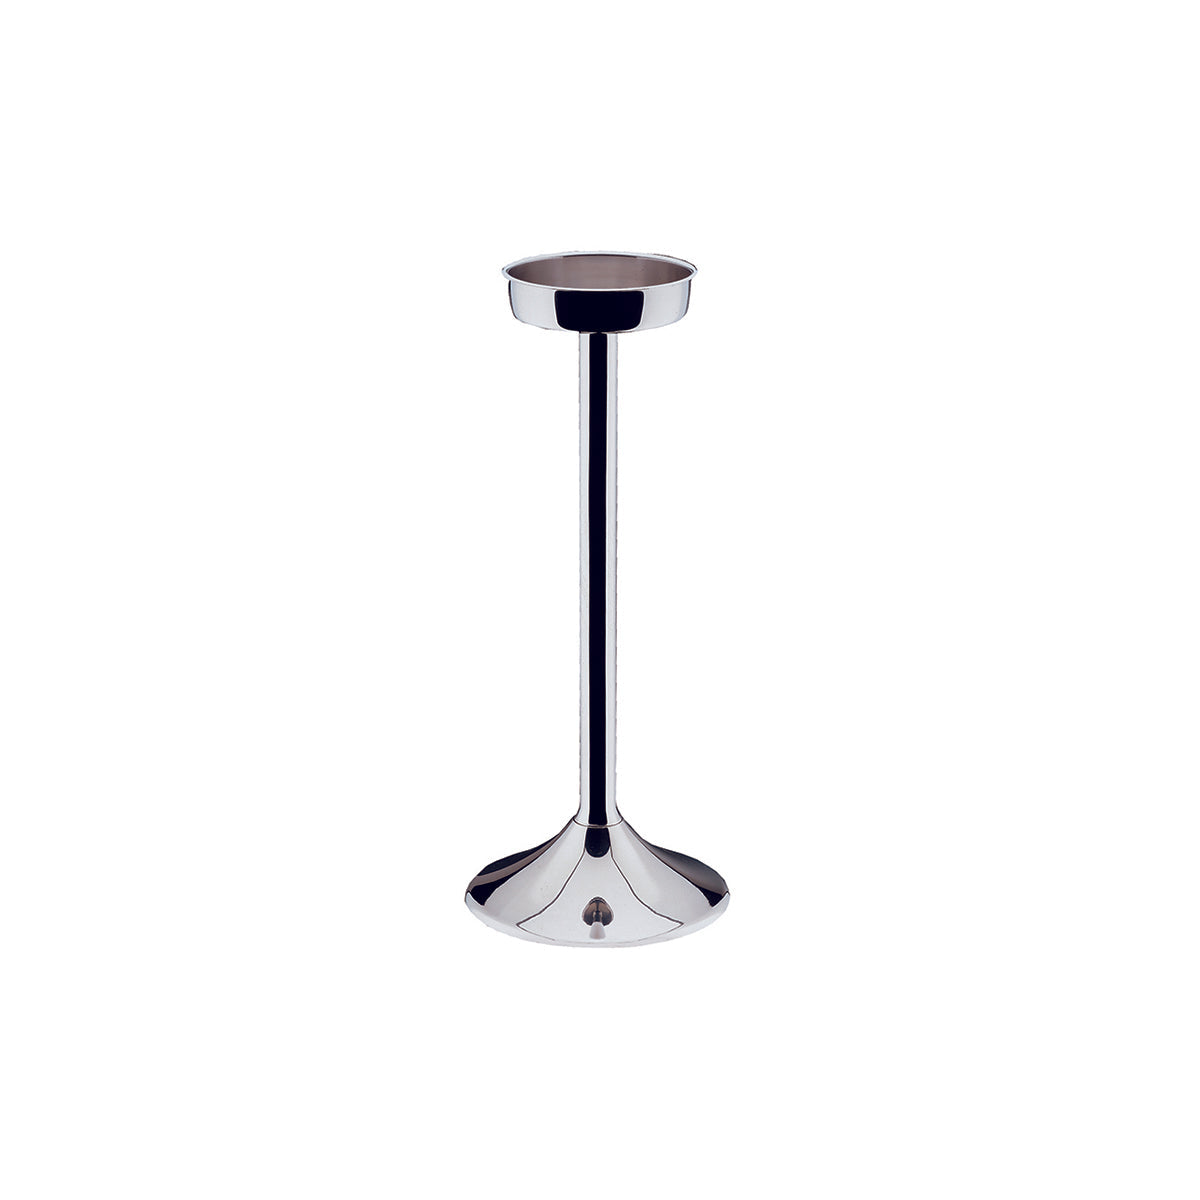 19.8337.6440 WMF Neutral Wine Cooler Stand Silverplated Tomkin Australia Hospitality Supplies